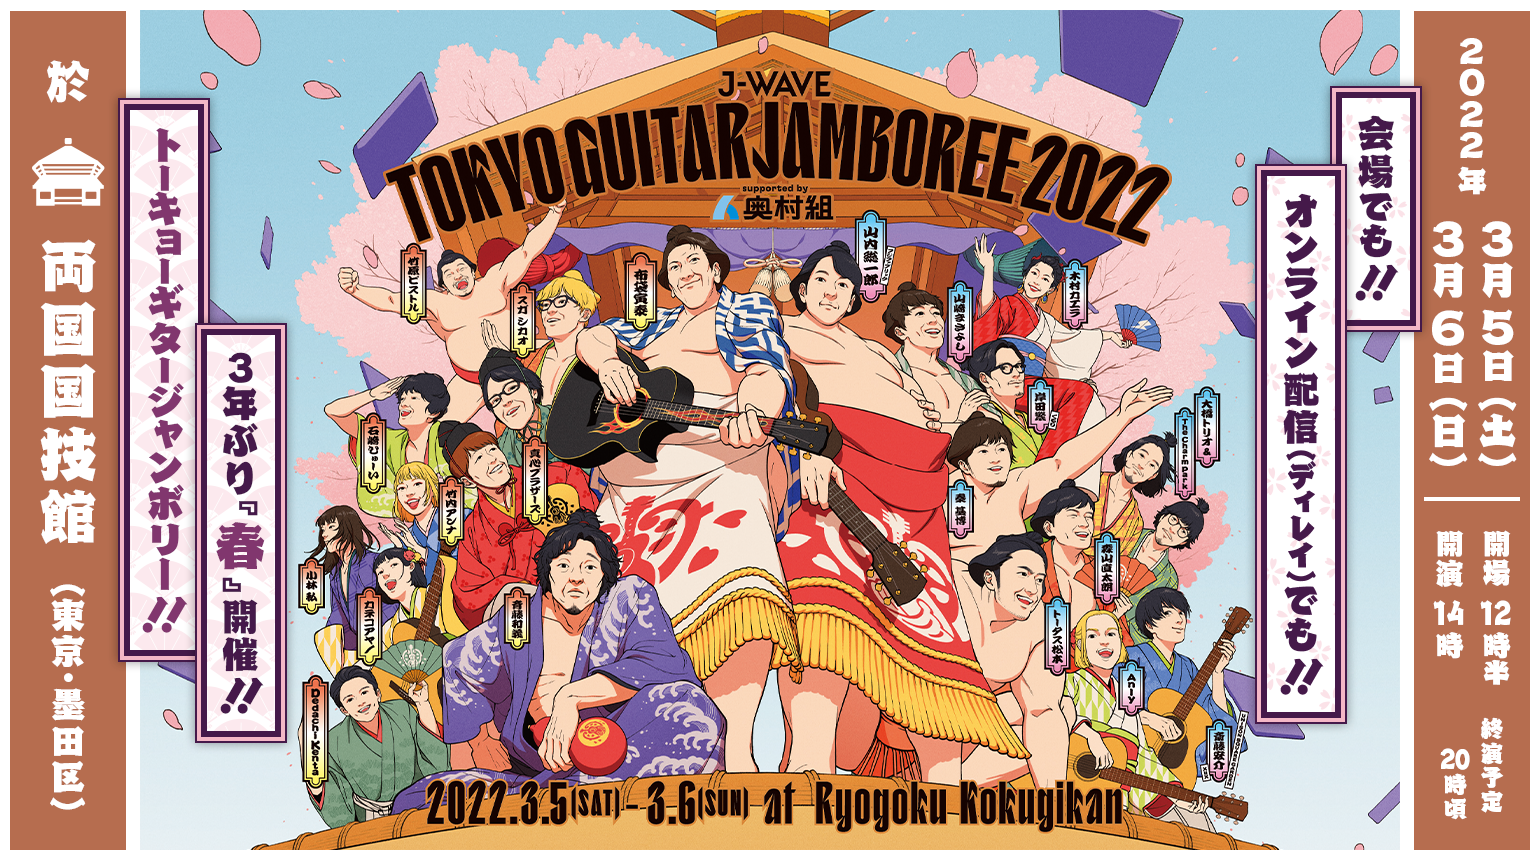 J-WAVE TOKYO GUITAR JAMBOREE 2022 supported by 奥村組